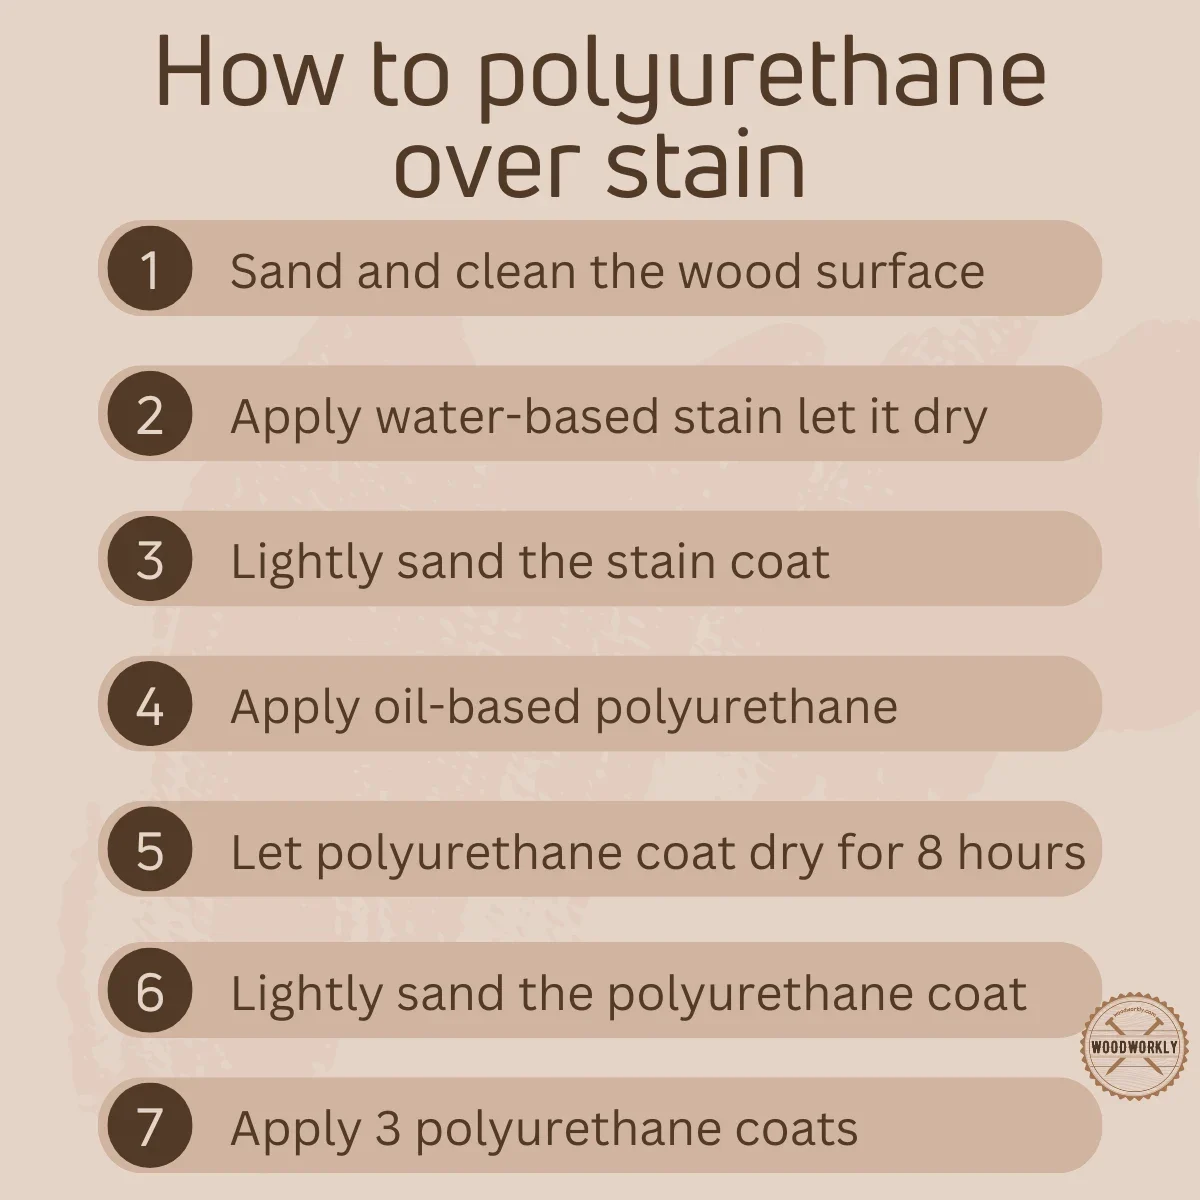 How To Apply Oil-based Polyurethane Over Water-based Stain